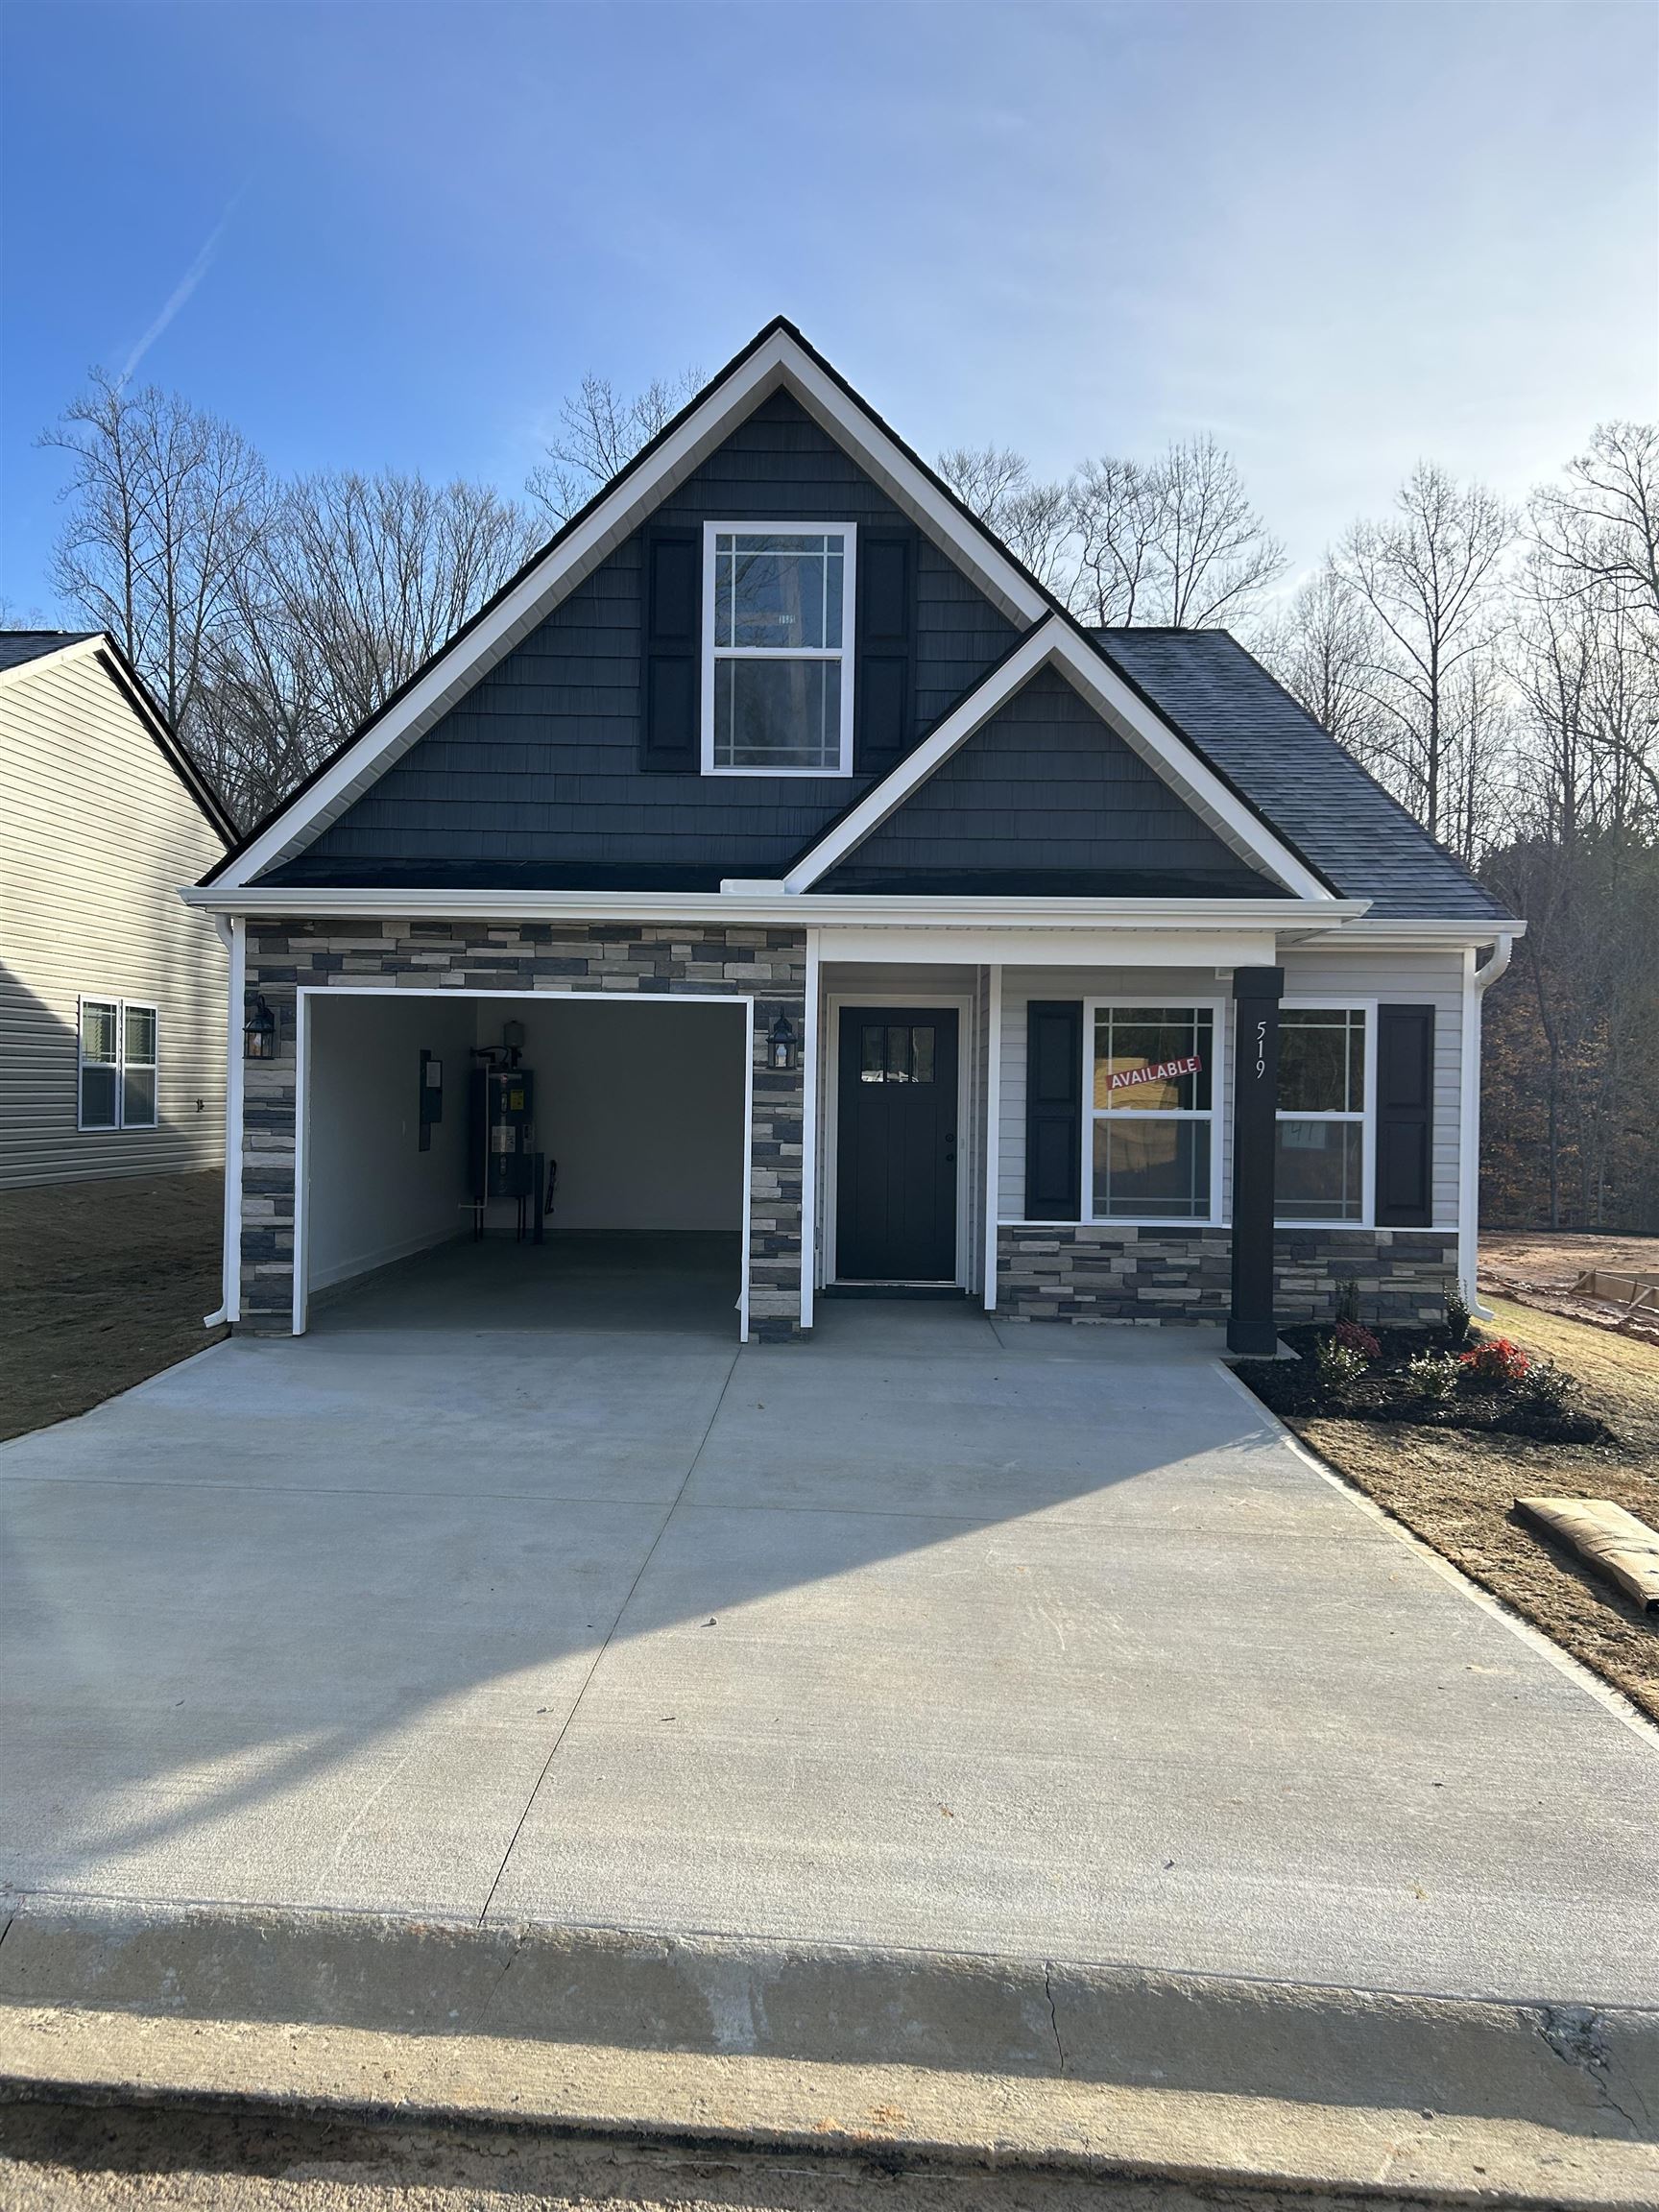 Inman plan - 1165 SF - 2 BR/ 2 BA home with a one car garage. Tall ceilings in the open living area. Kitchen features a large island, granite countertops and Marsh cabinets. A covered back patio is great for entertaining. Lot 41